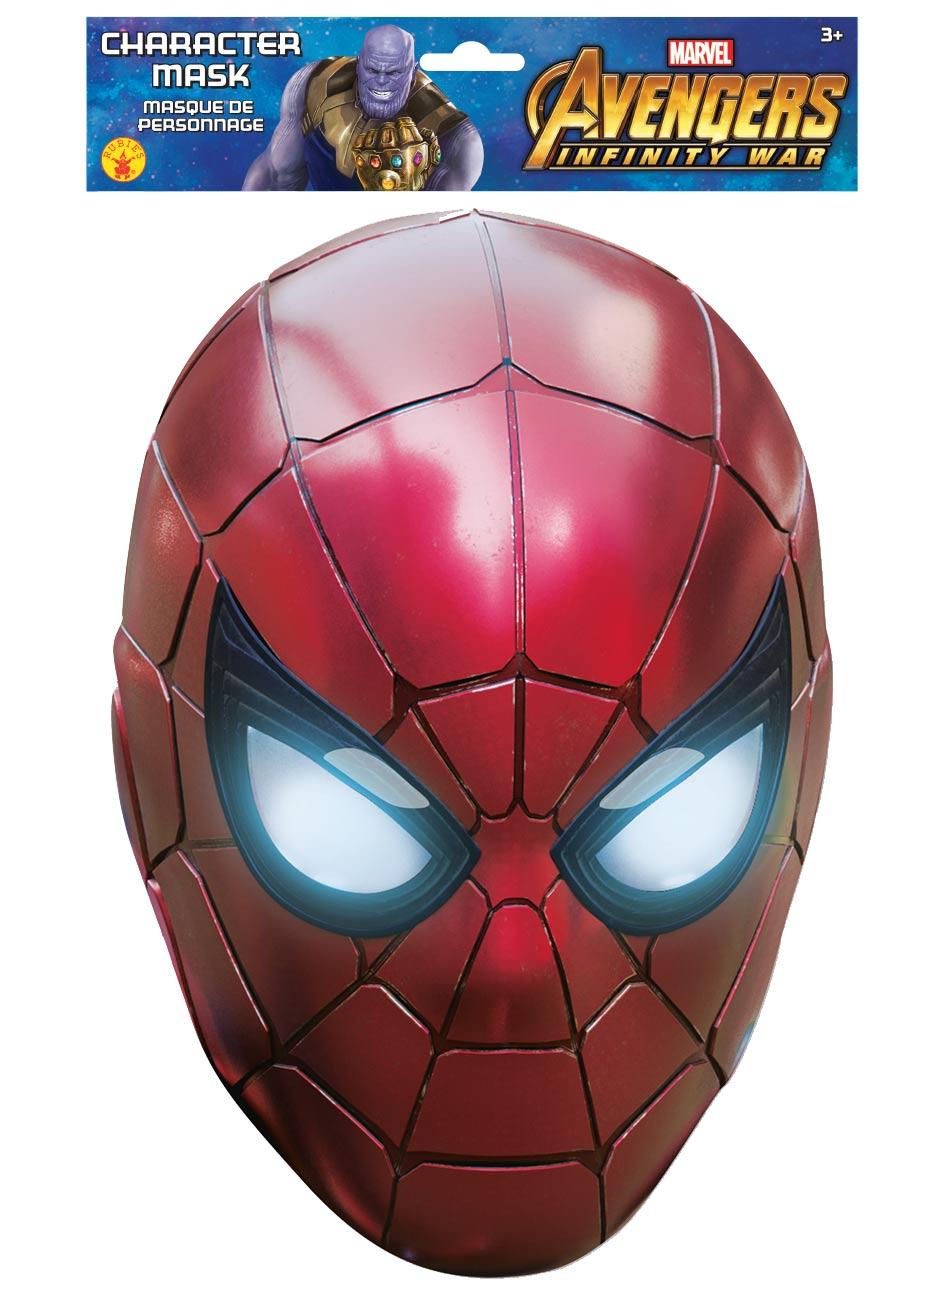 Iron Spiderman Character Face Mask by Mask-erade 200333 available from the Avengers Infinity War collection here at Karnival Costumes online party shop